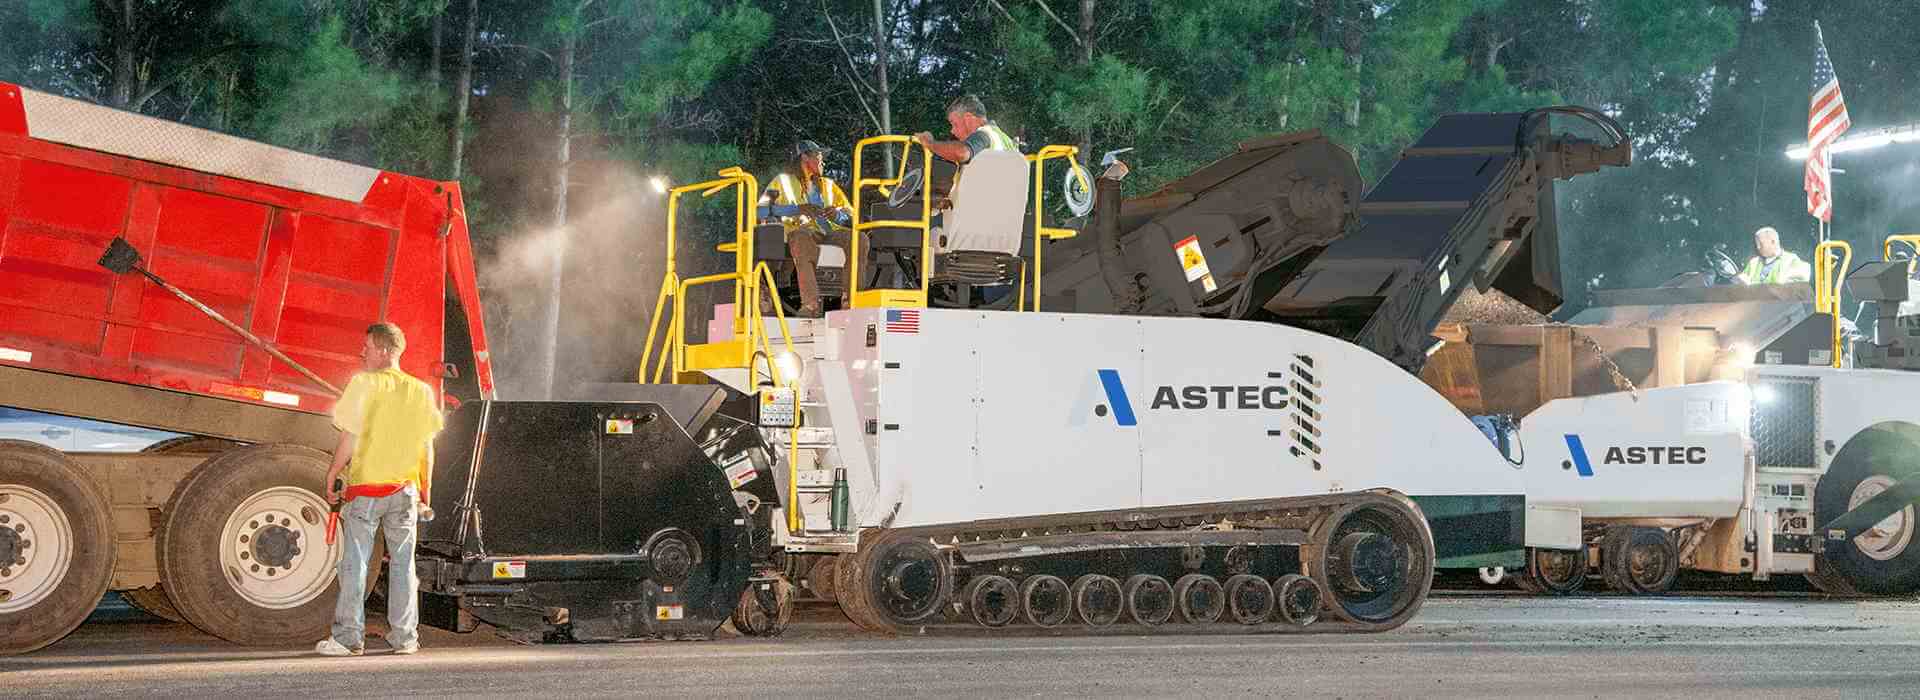 A Roadtec MTV-1105 material transfer vehicle working with a roadtec RP-190 paver